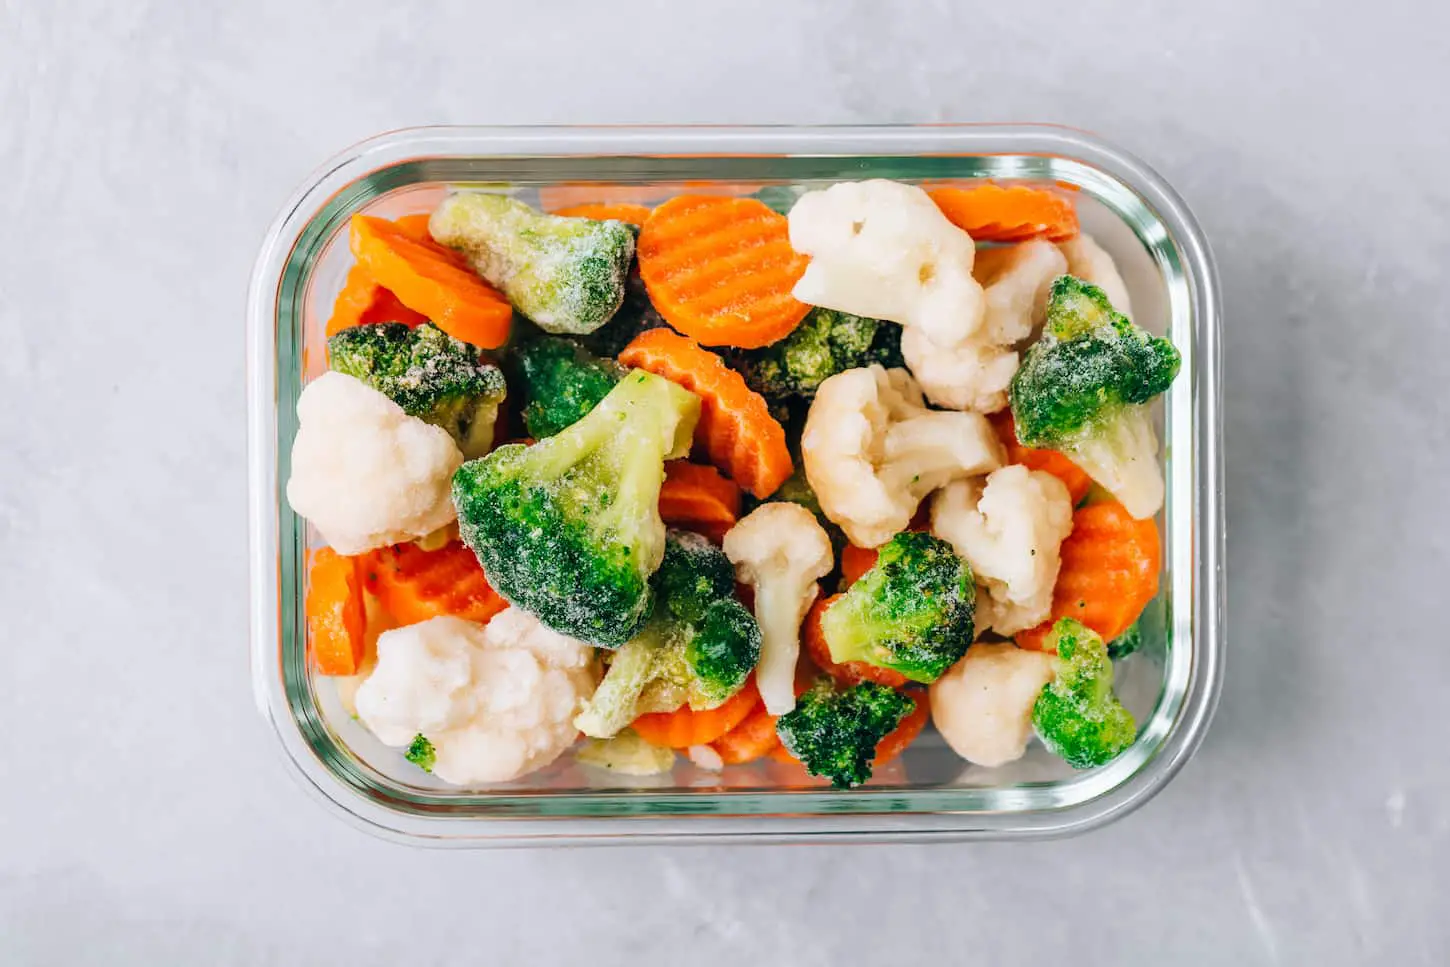 An image of carrots, broccoli, and cauliflower in a glass container on gray stone background.